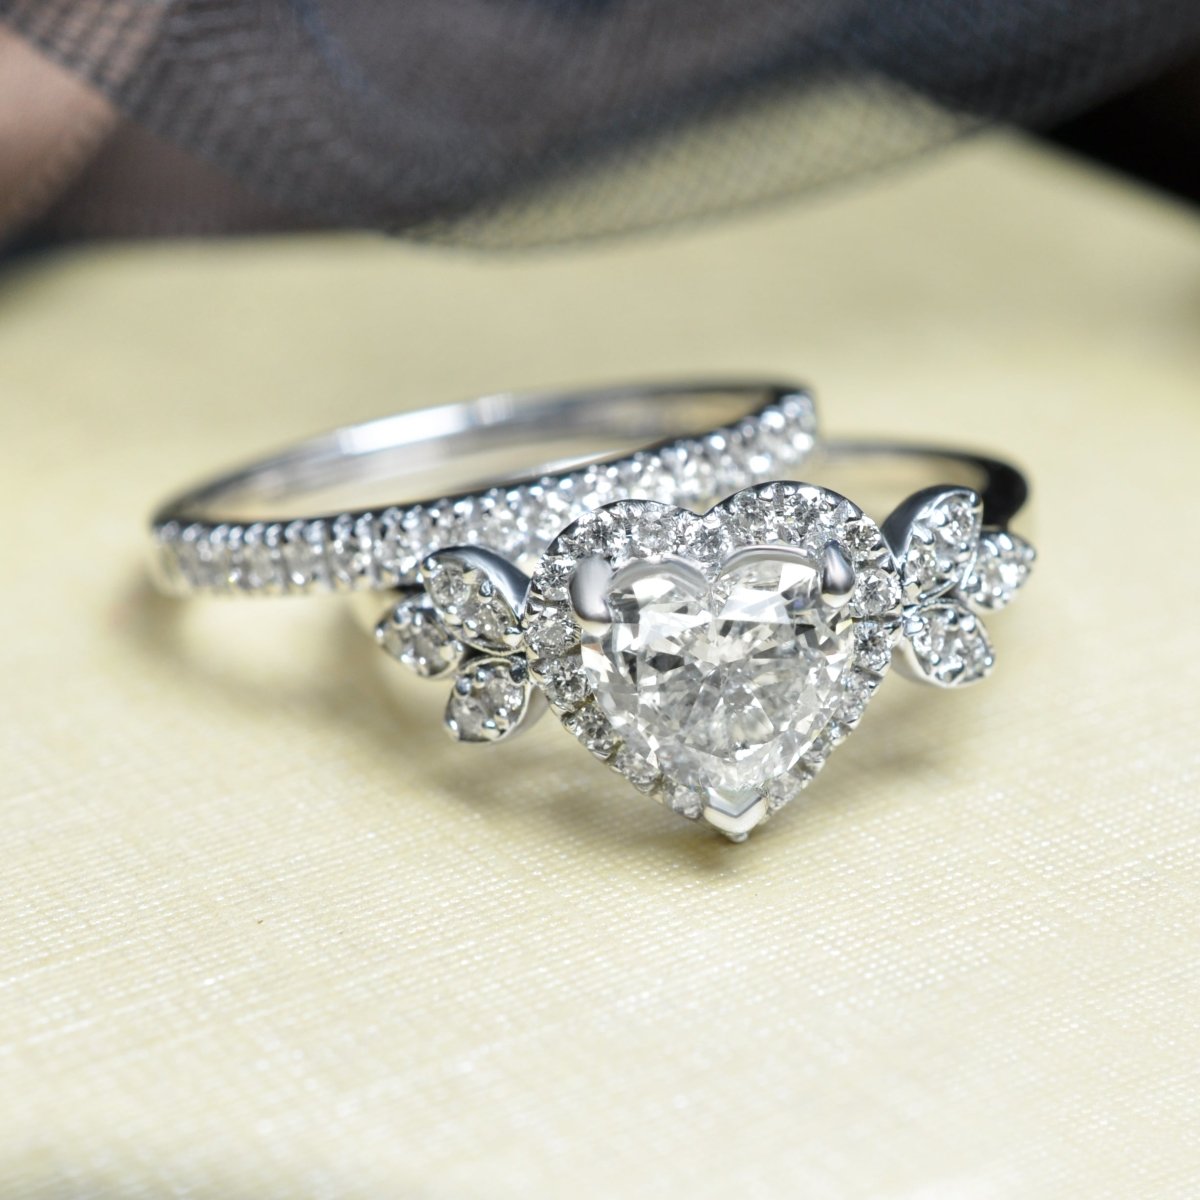 Breathtaking 1.50 CT Heart and Round Cut Diamond Bridal Set in 14KT White Gold - Primestyle.com